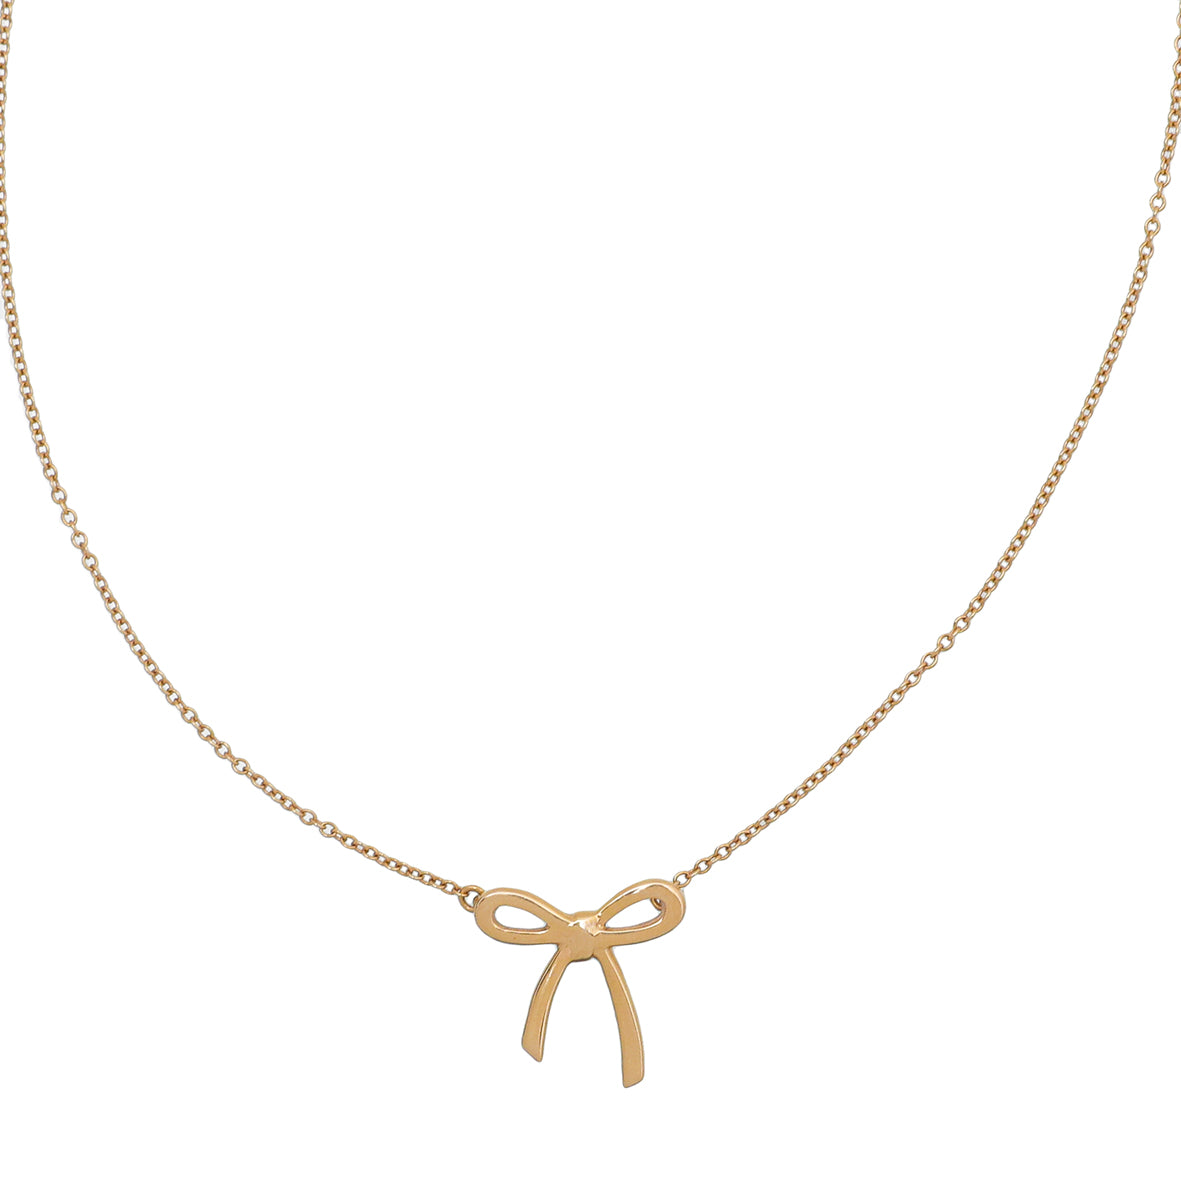 Tiffany & Co 18K Yellow Gold Bow Pendant Necklace